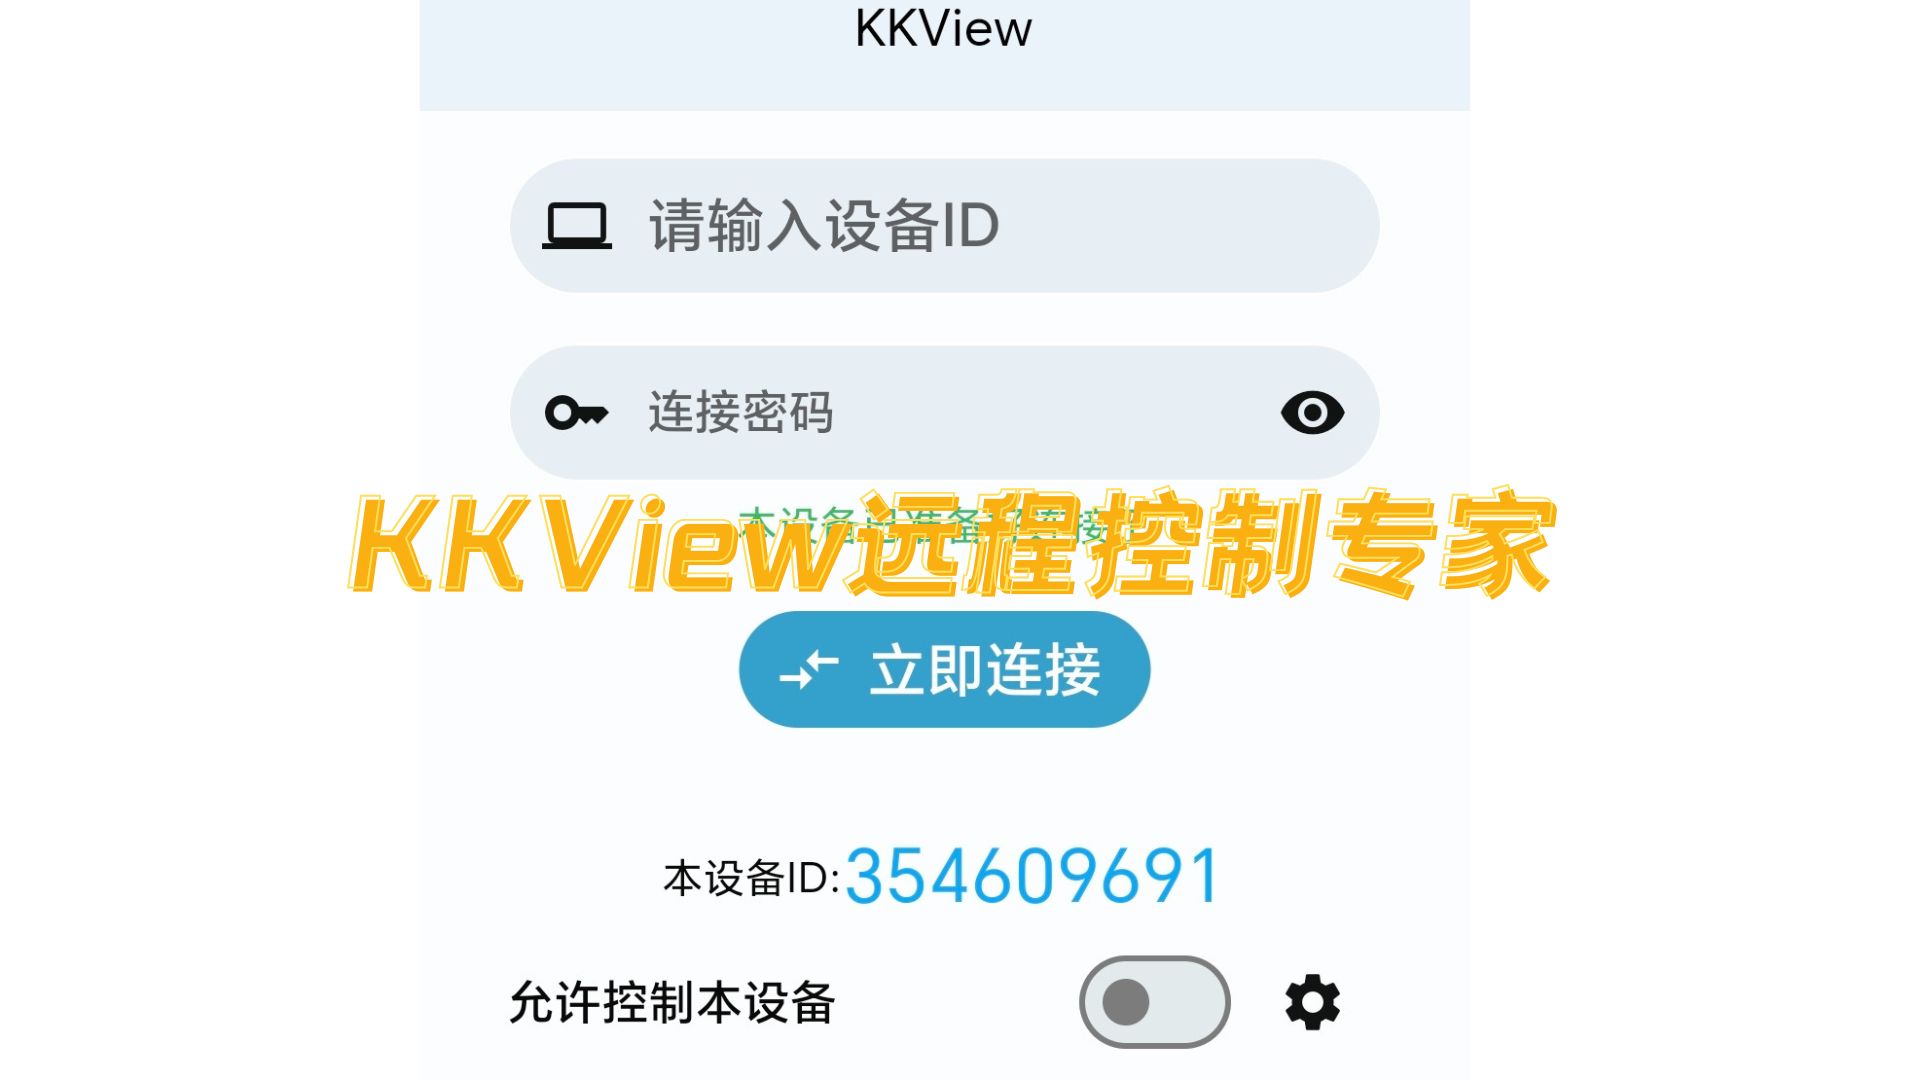 KKVIEW<span style='color:red;'>远程</span>: <span style='color:red;'>安</span><span style='color:red;'>卓</span>免费<span style='color:red;'>远程</span>控制<span style='color:red;'>软件</span>